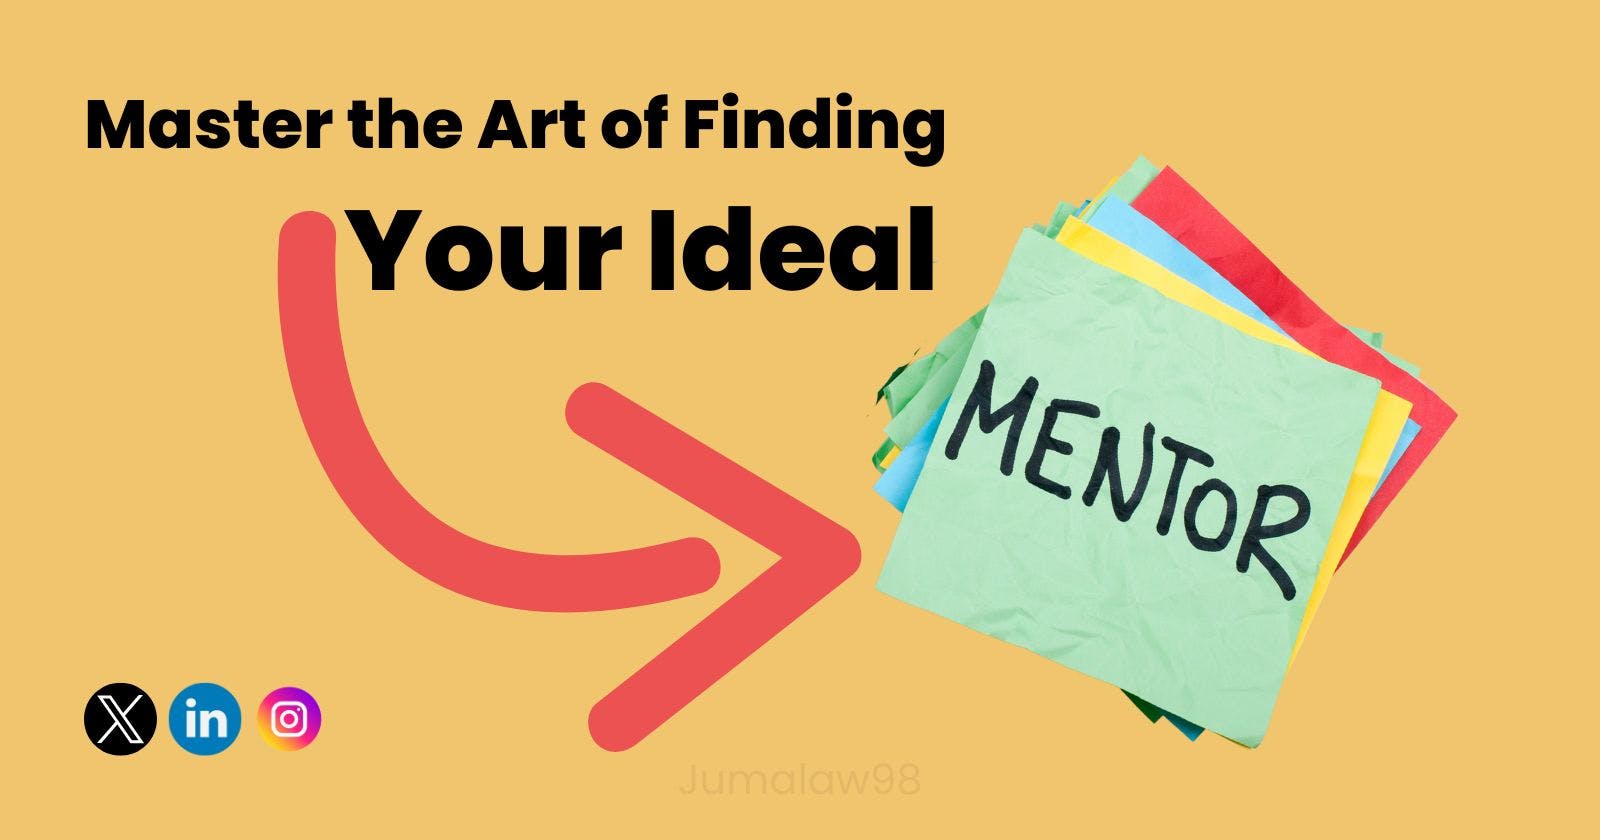 Level Up Your Journey: Mastering the Art of Finding an Ideal Mentor